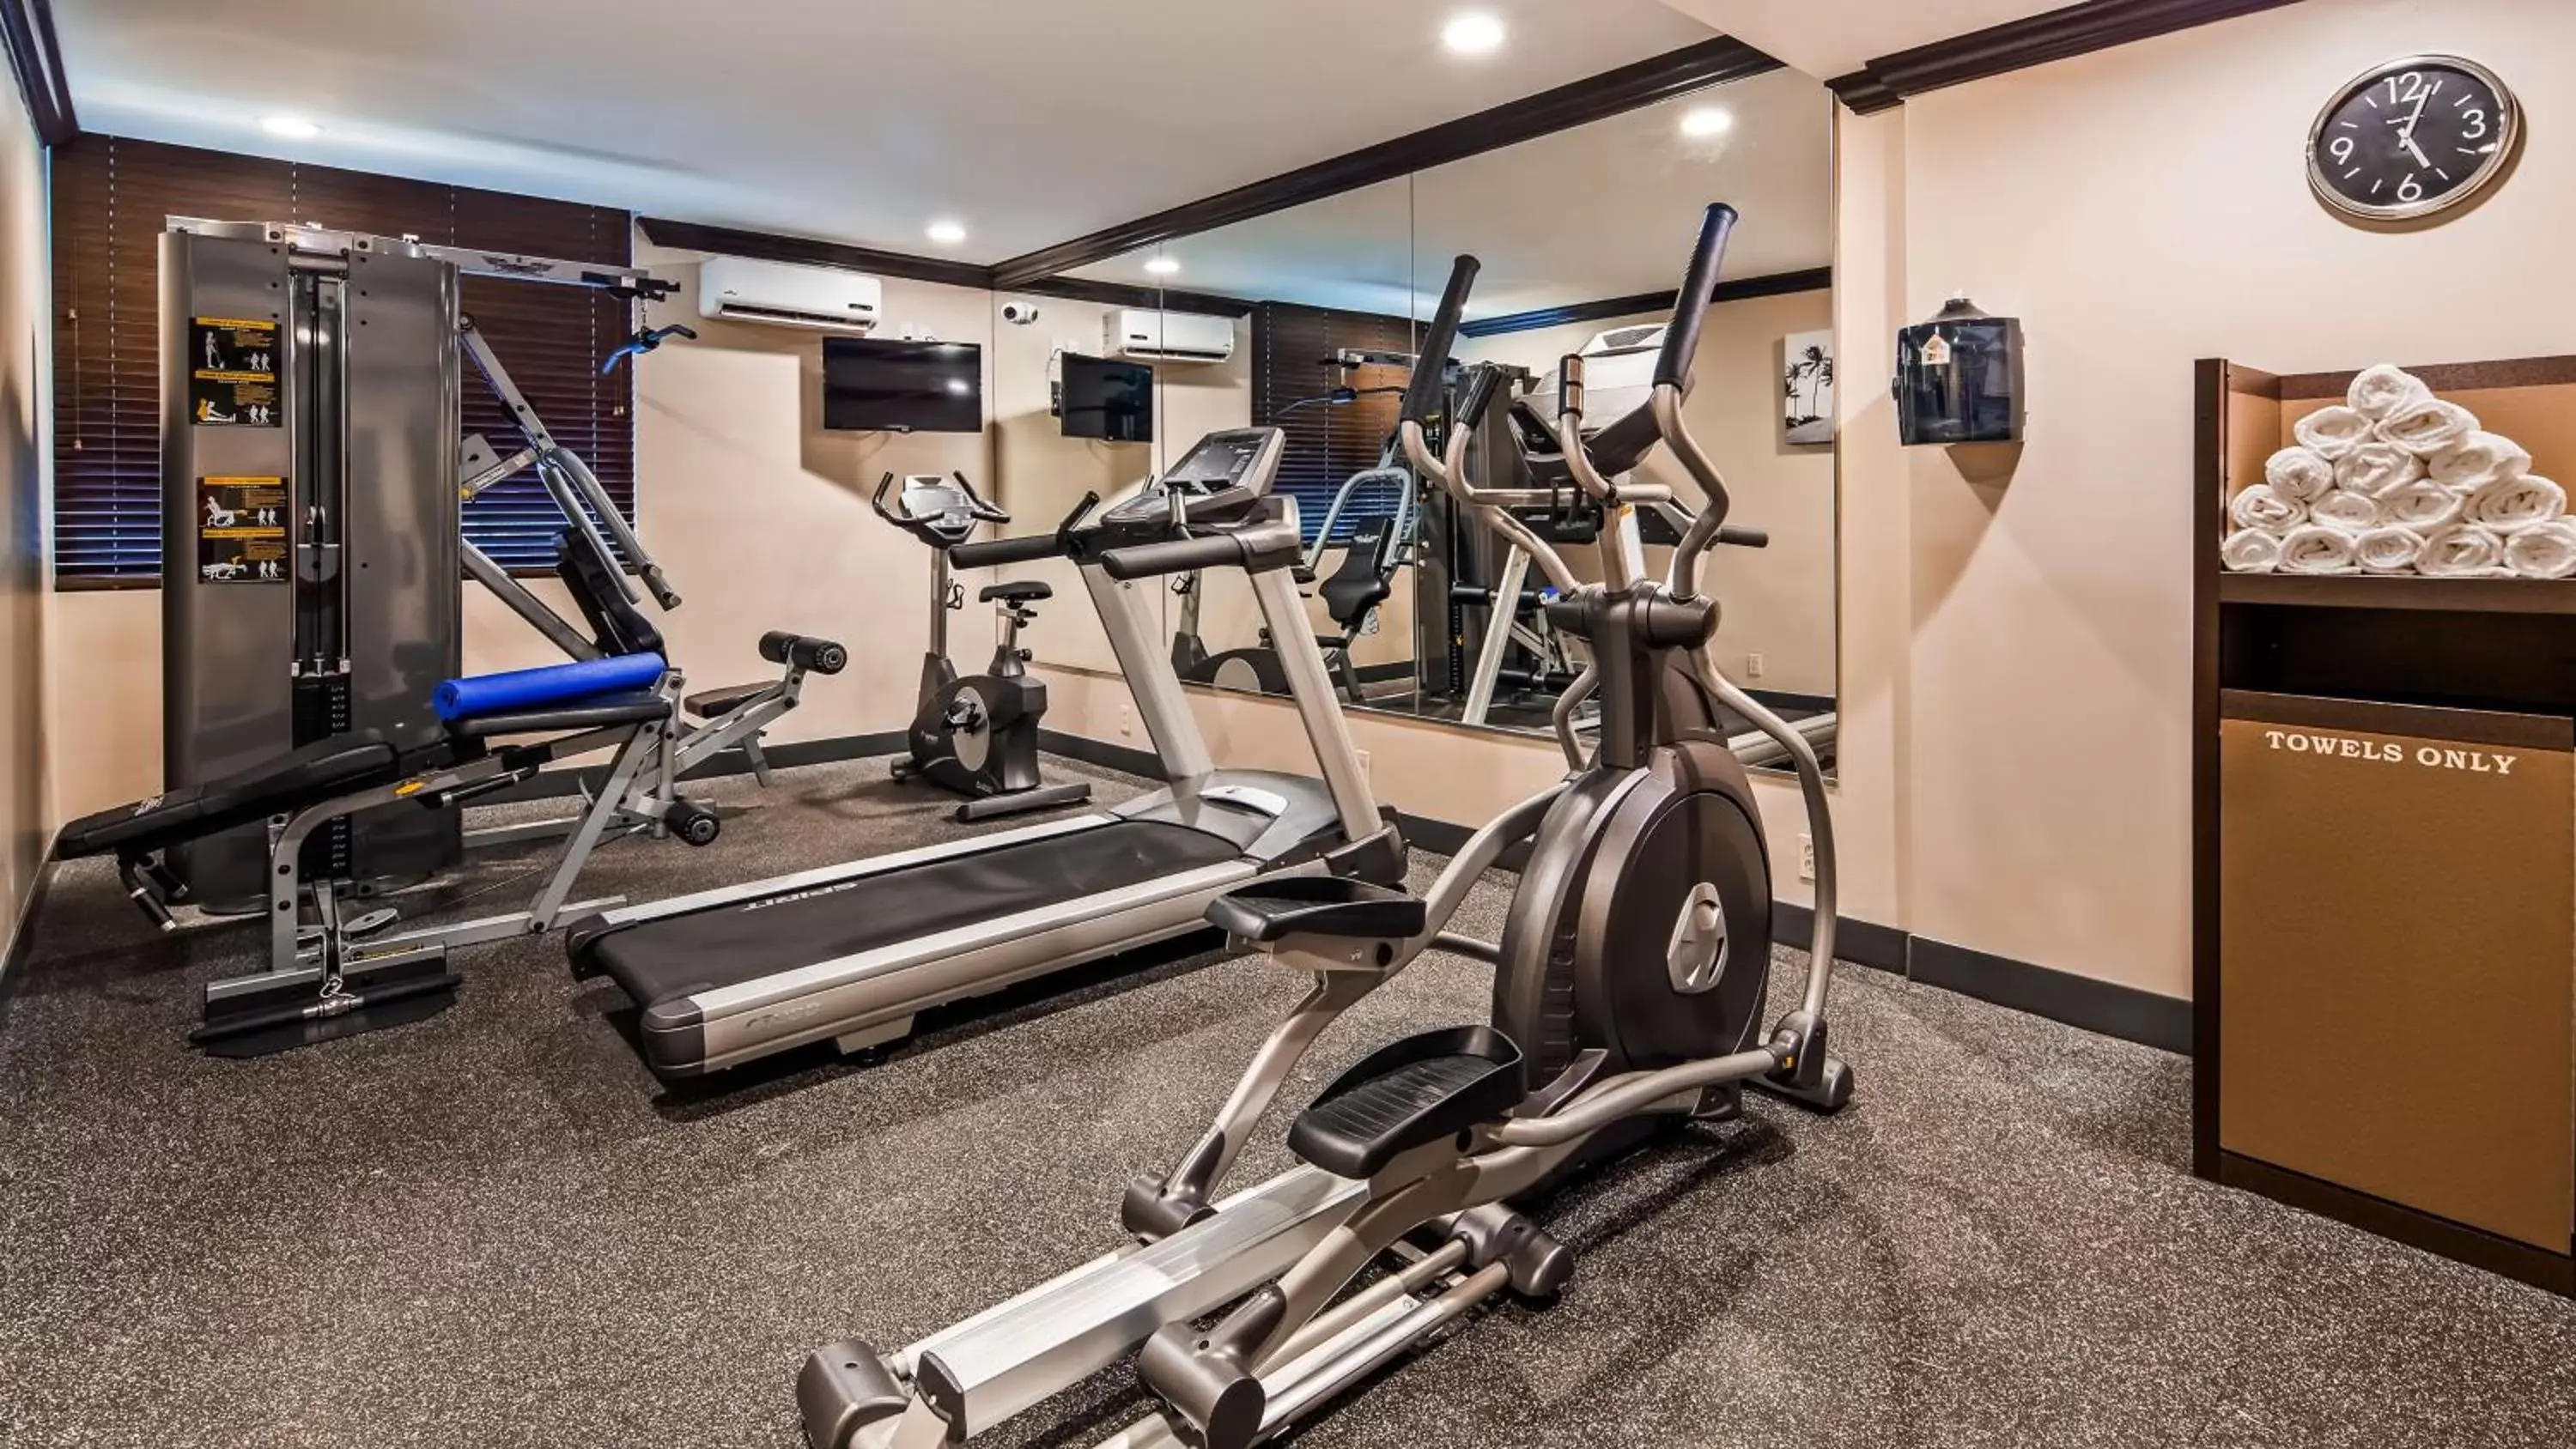 Fitness centre/facilities, Fitness Center/Facilities in Best Western Ft Lauderdale I-95 Inn